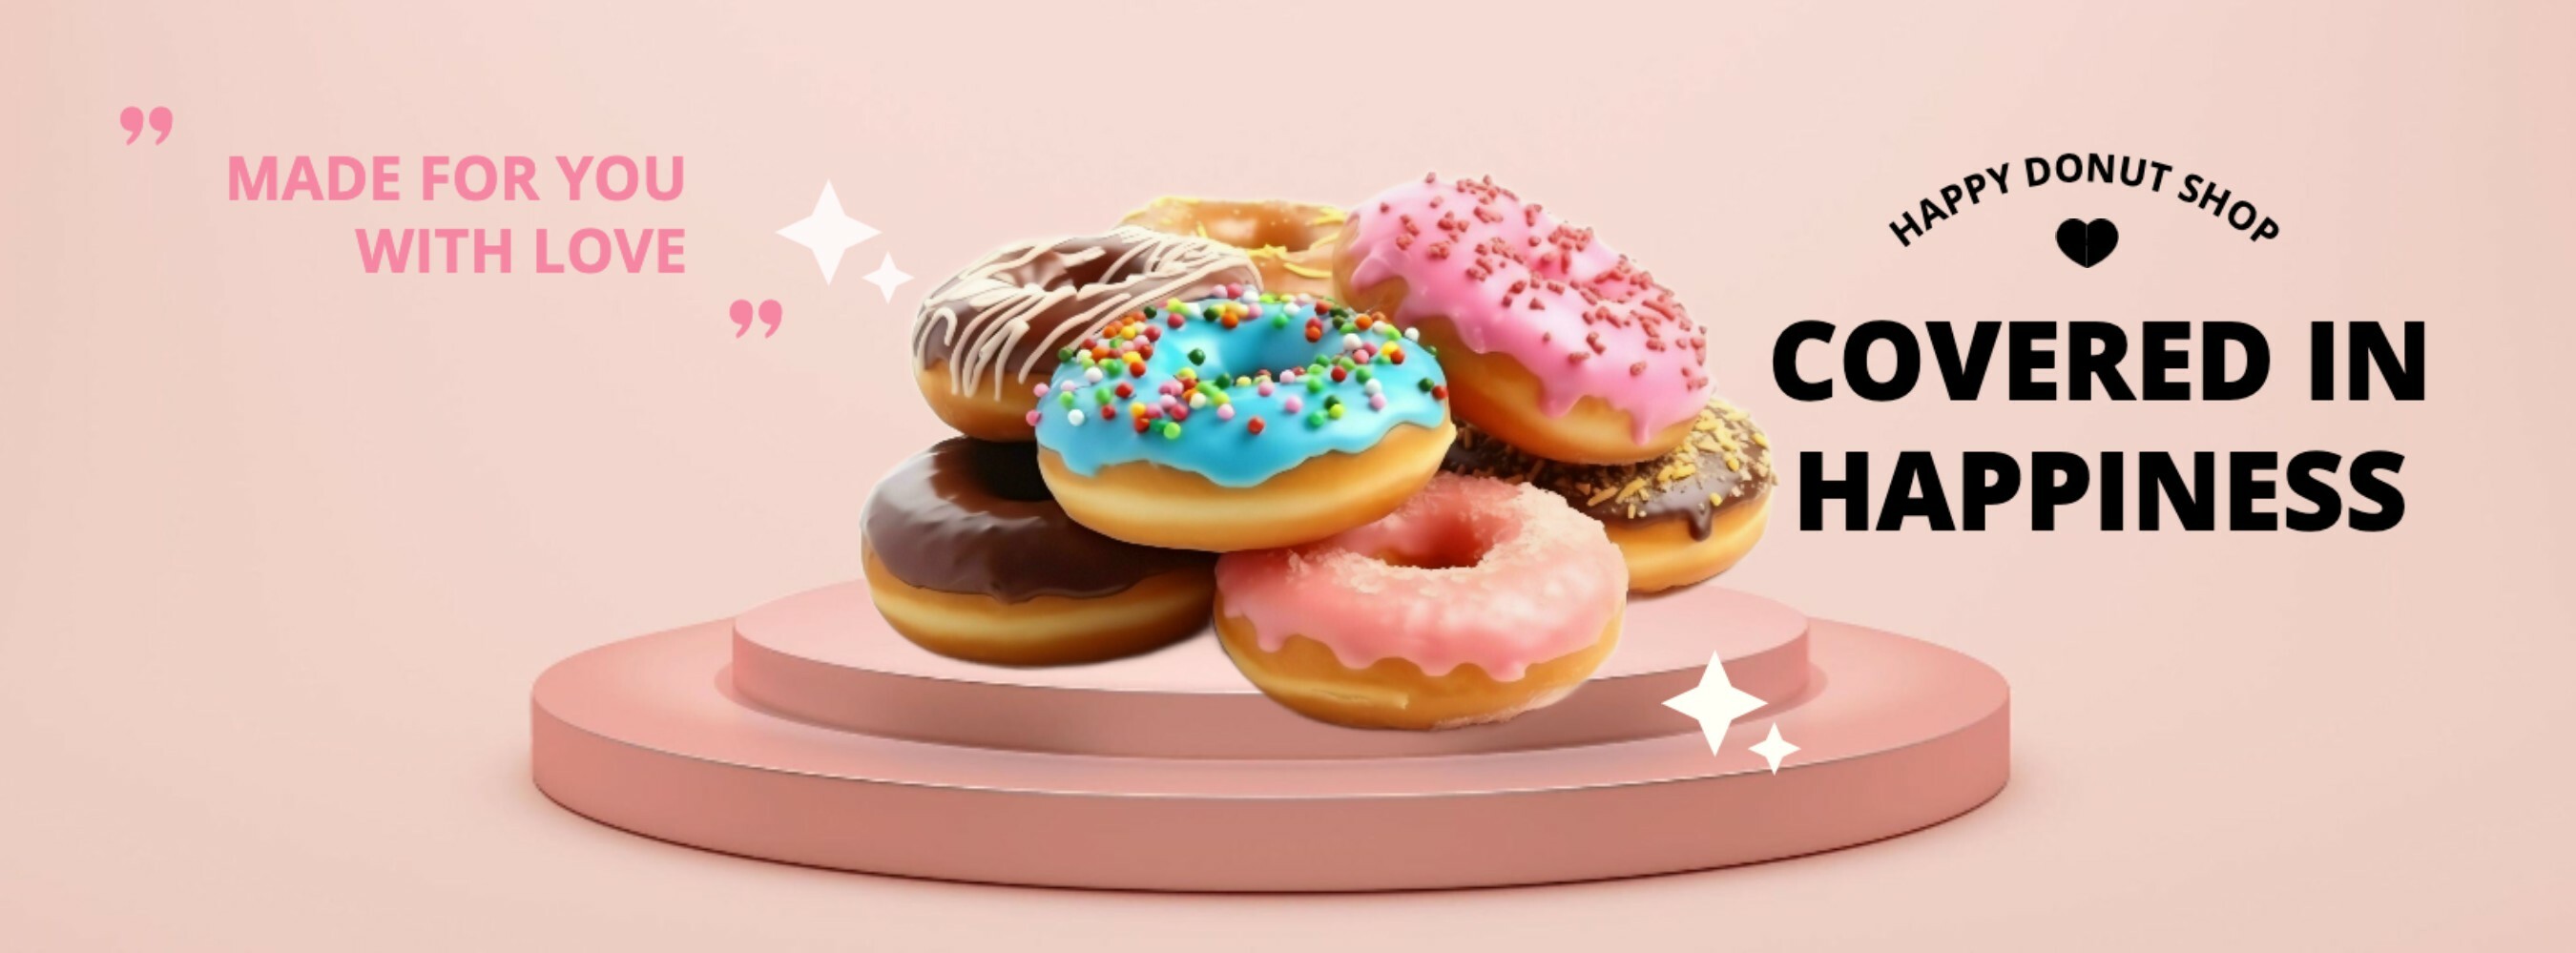 donut facebook cover template